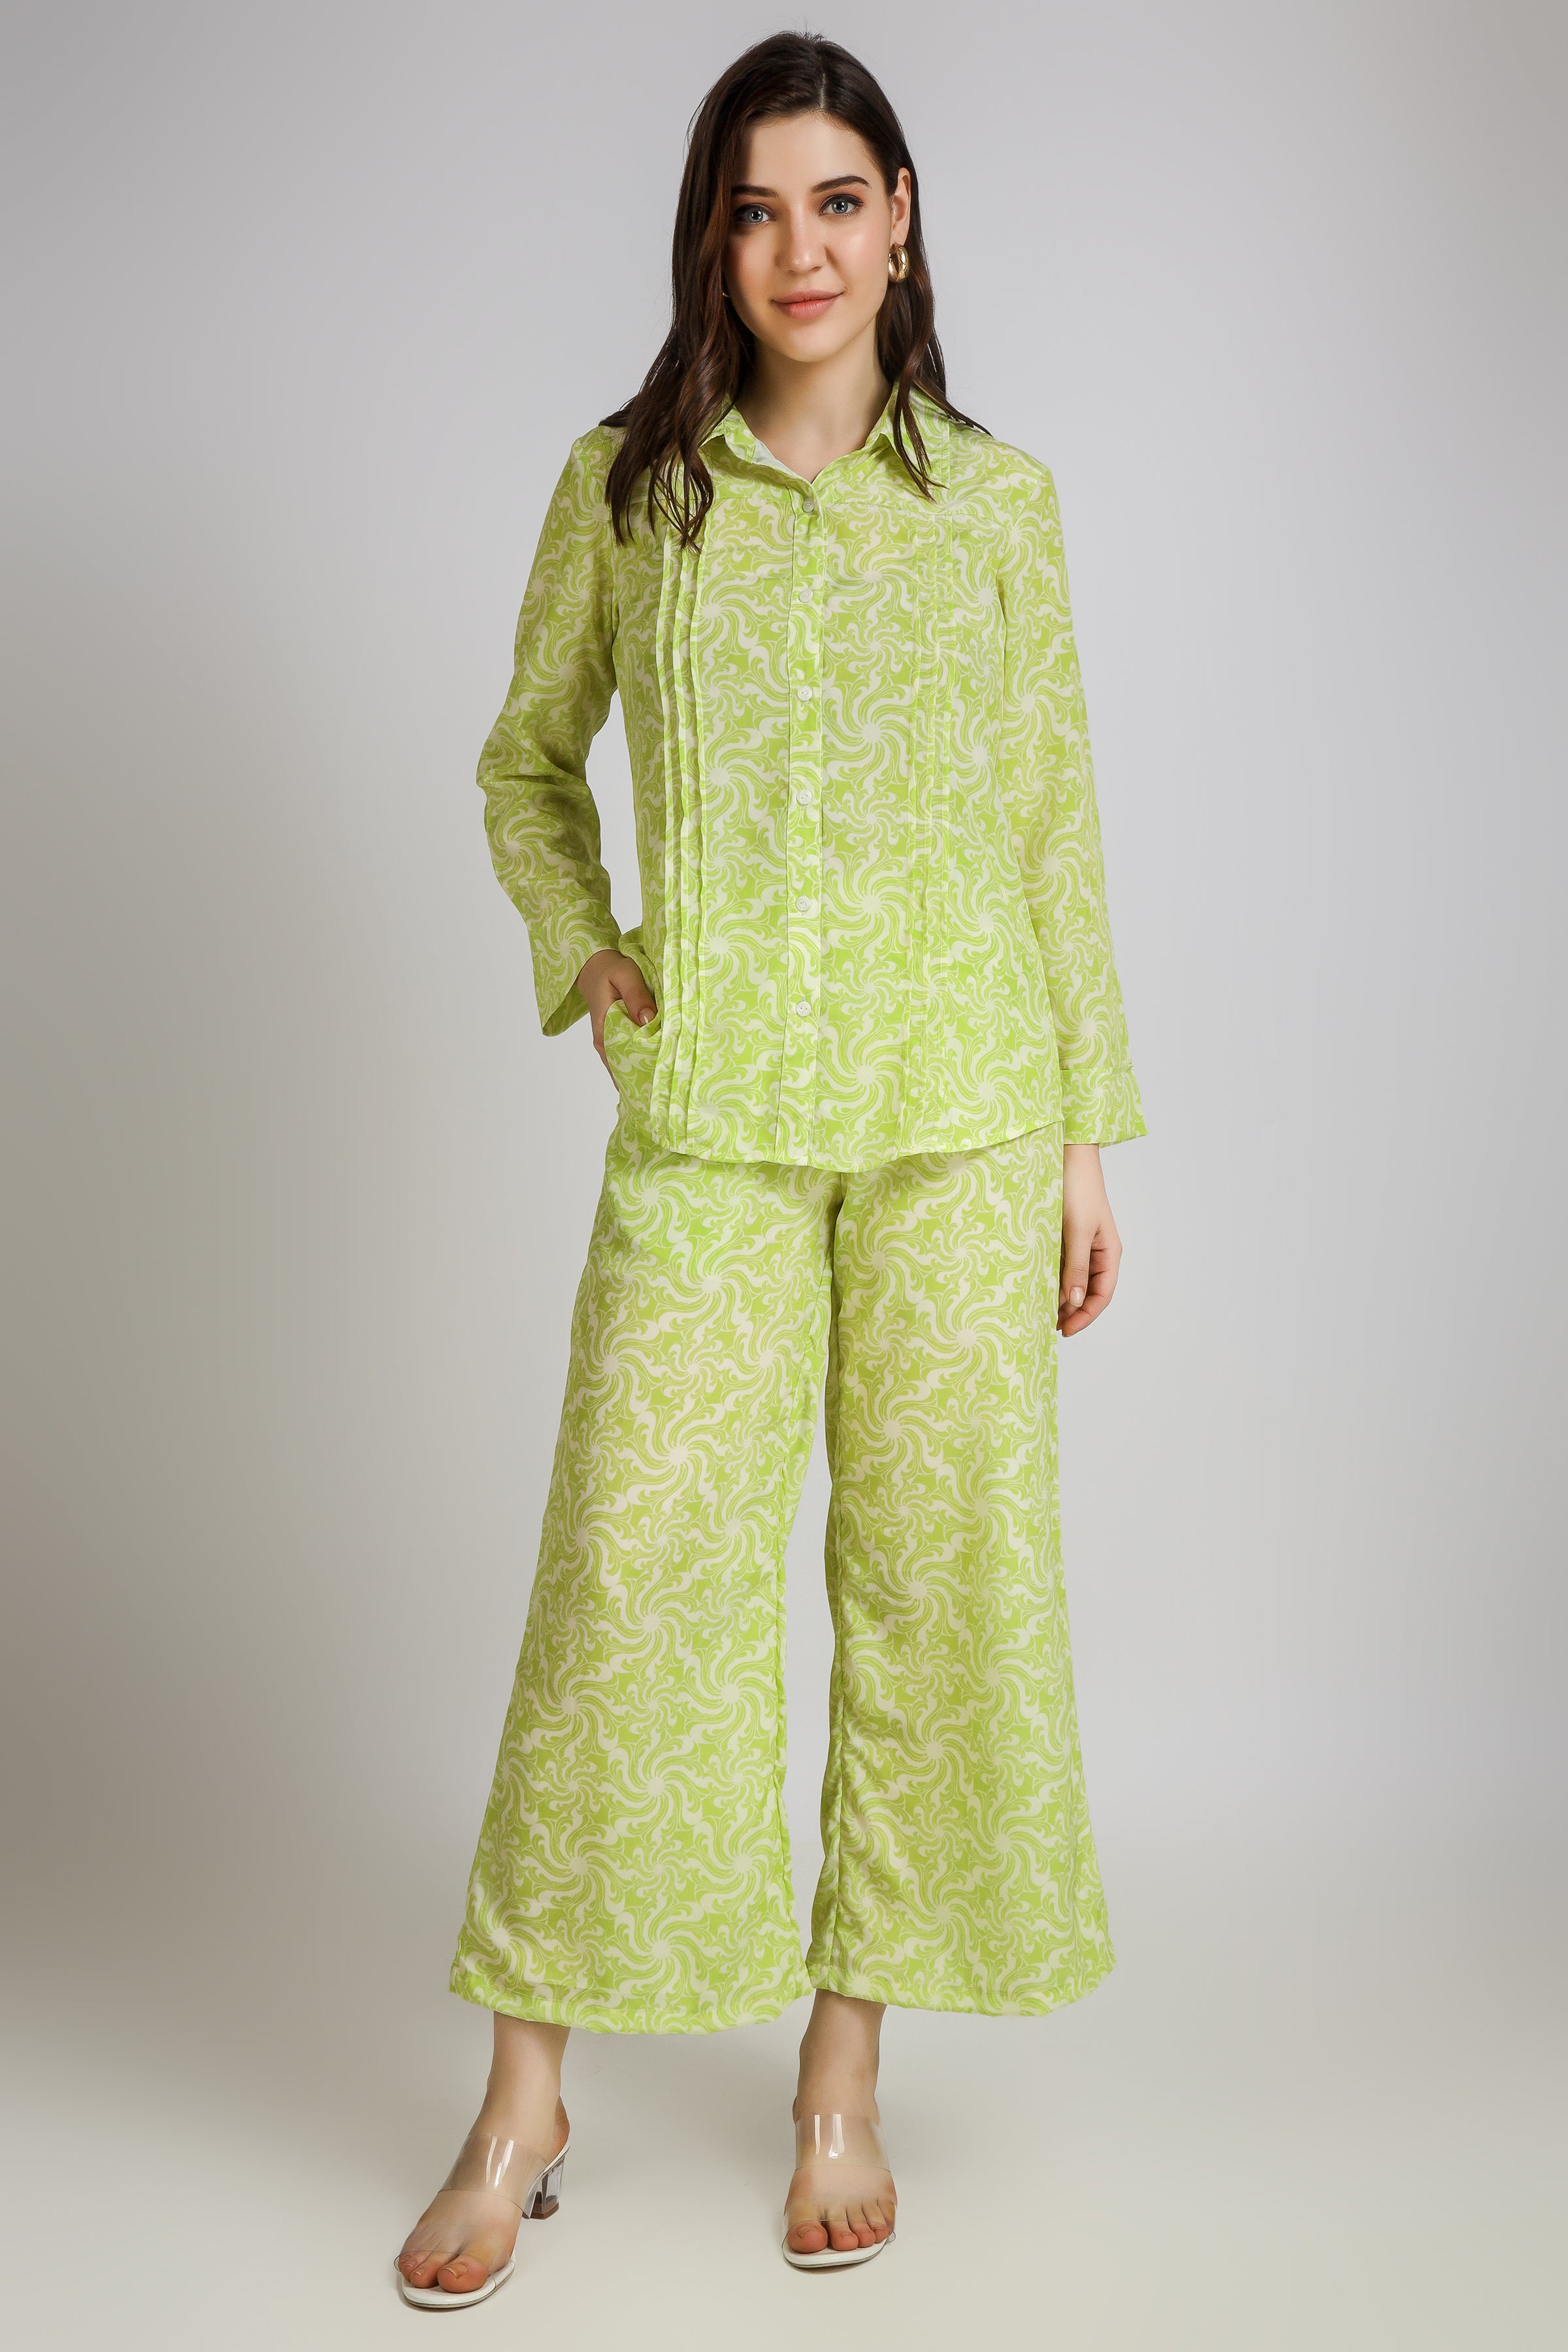 387 Lime Green Trousers Stock Photos HighRes Pictures and Images  Getty  Images